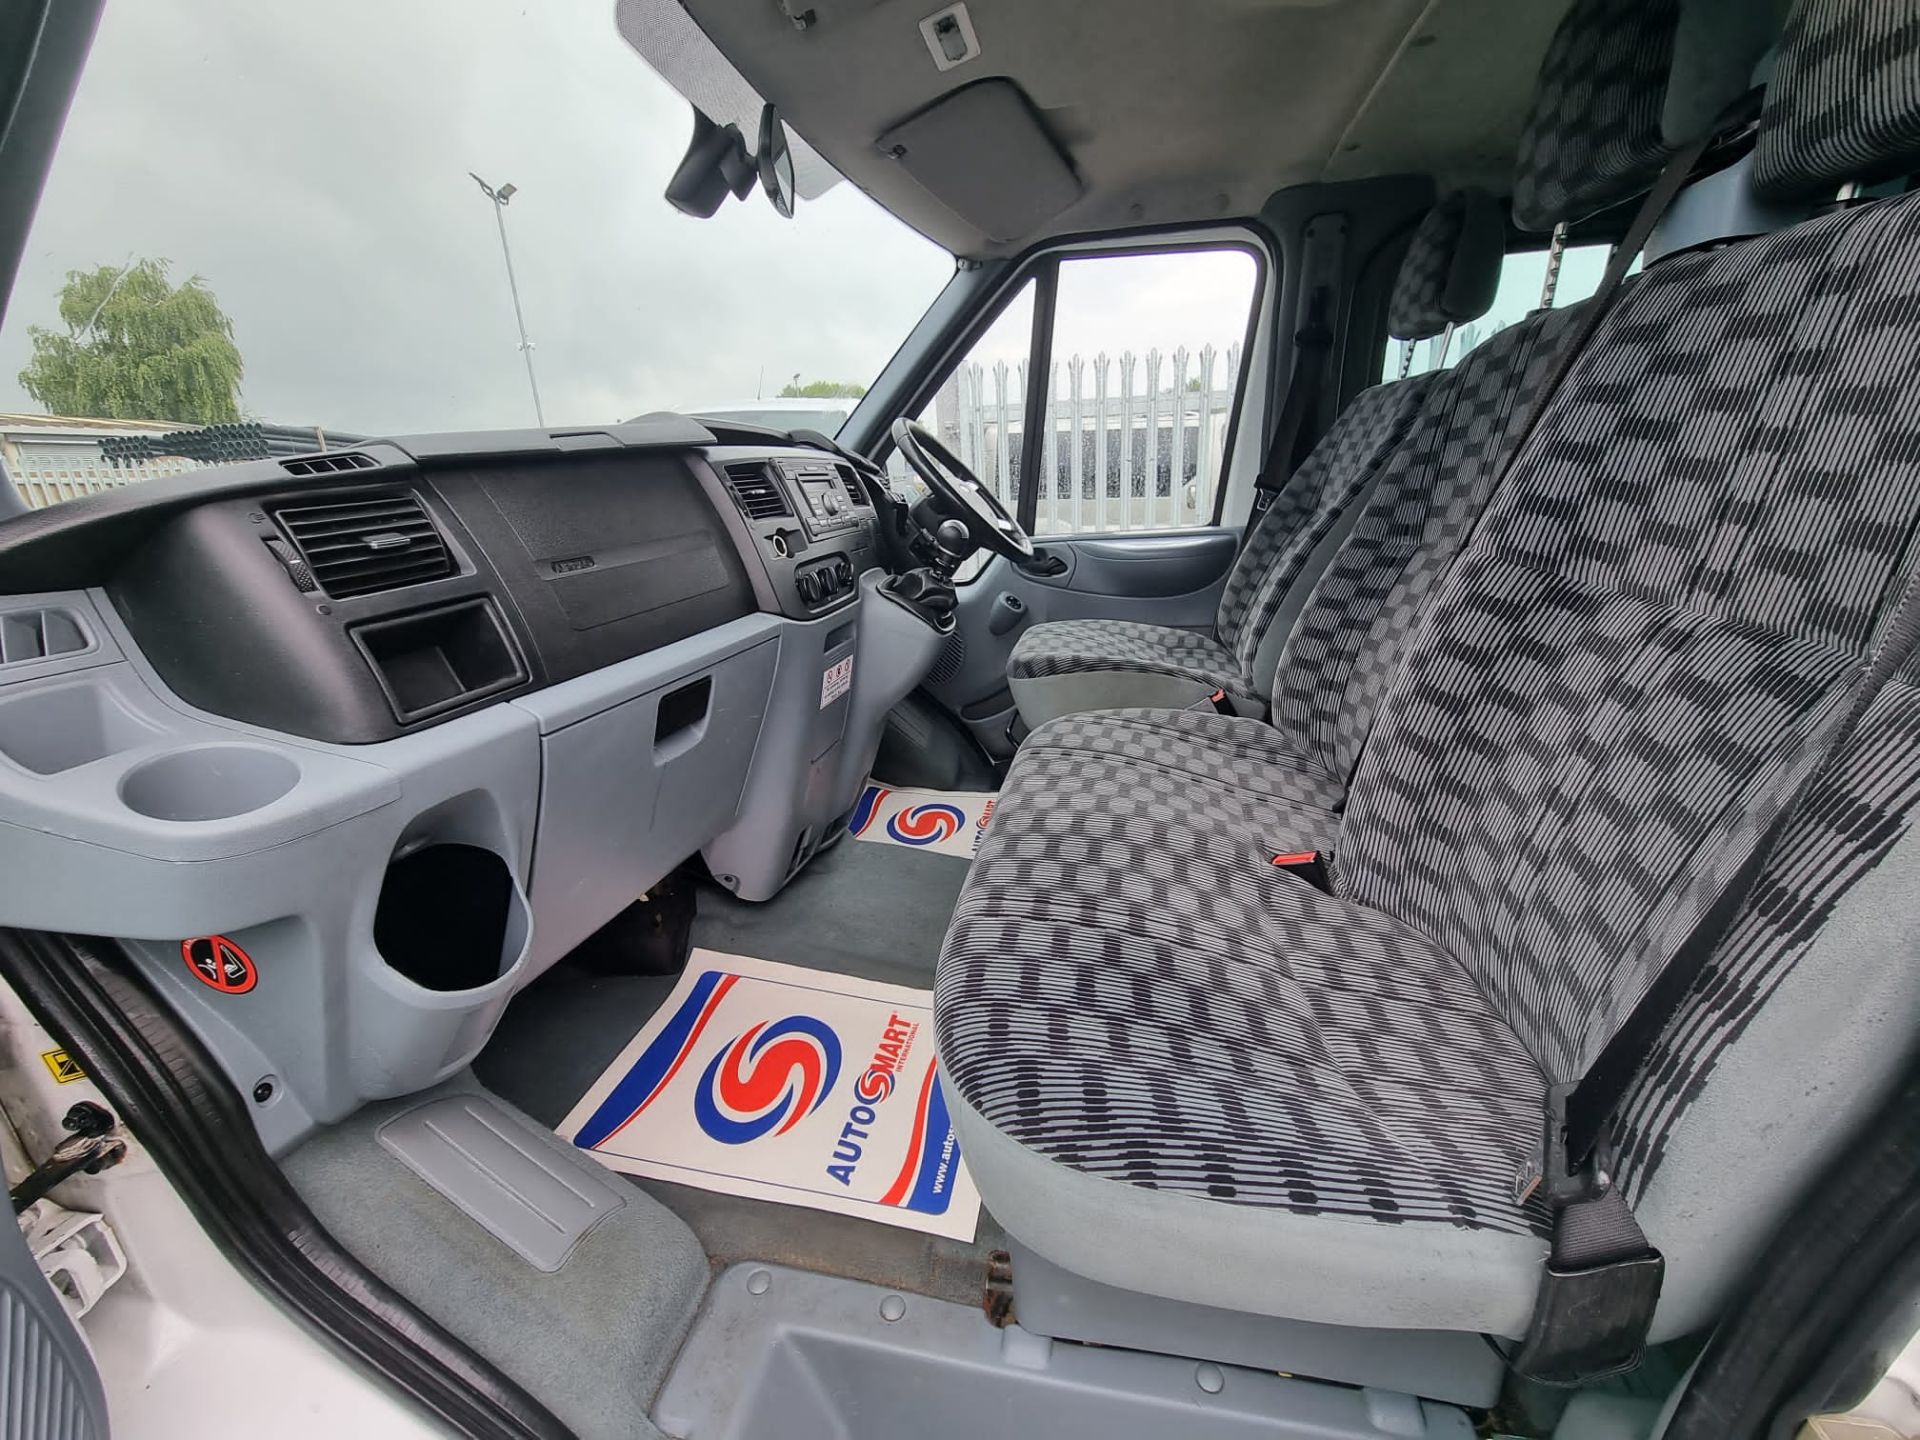 Ford Transit 2.2 TDCI Trend 2013 '13 Reg' 9 seats - Air Con - Cruise Control - Image 12 of 13